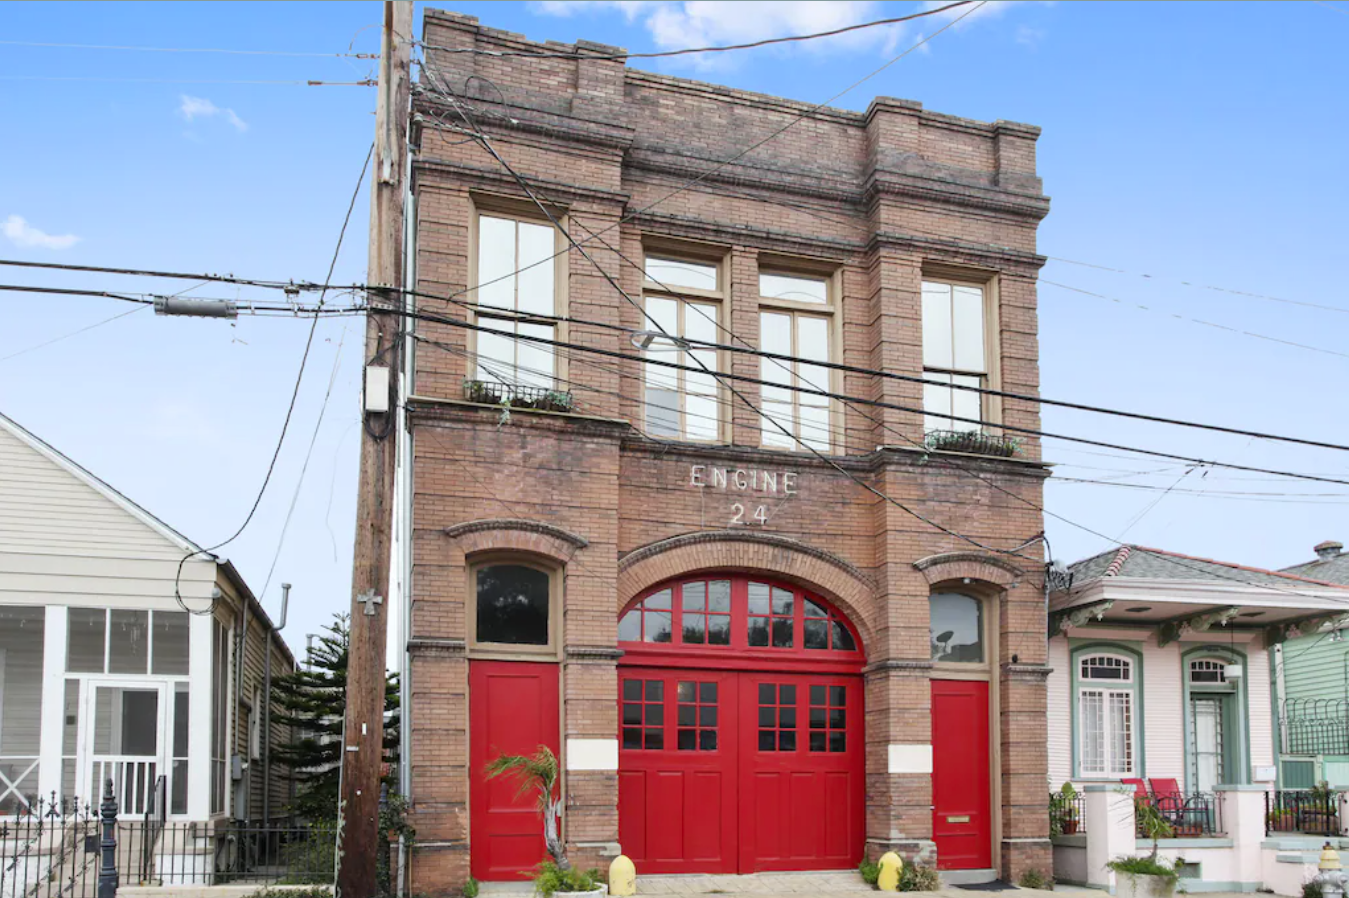 The exterior of an old firehouse in New Orleans' French Quarter. The brick façade has Engine 24 signage and red firehouse doors.